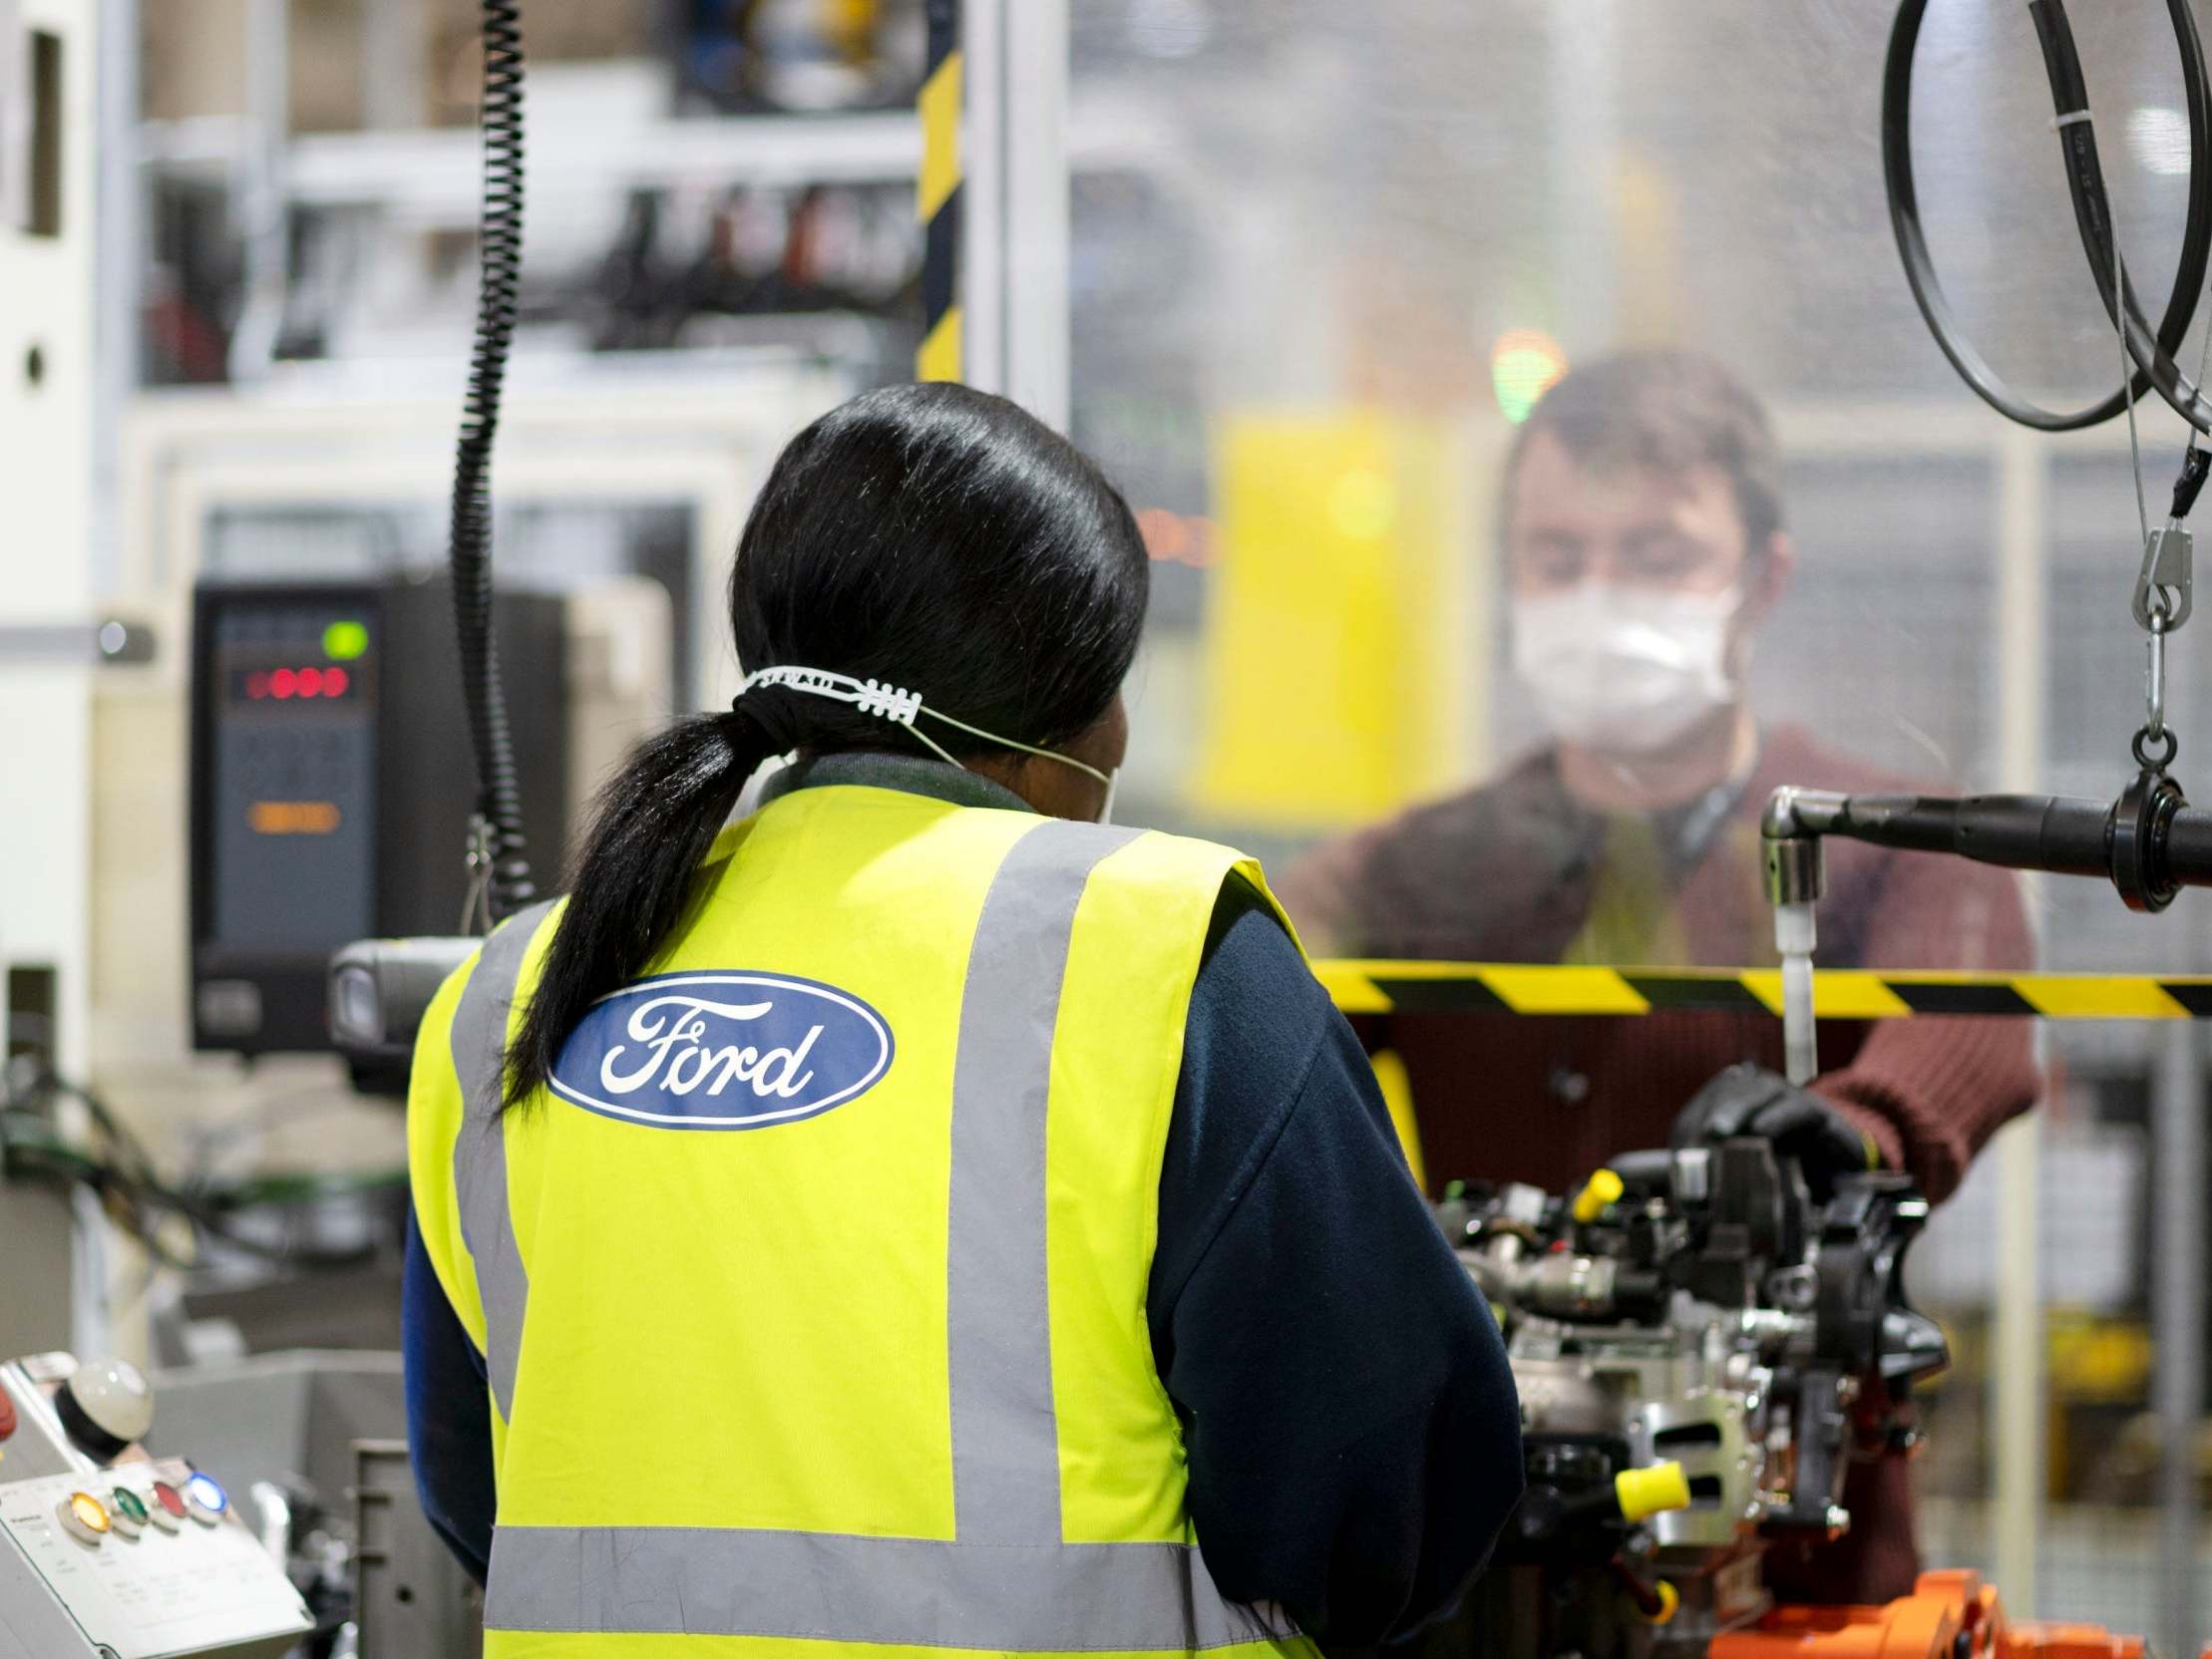 Workers wearing masks and separated by a screen at Ford's Dagenham Engine Plant in Essex